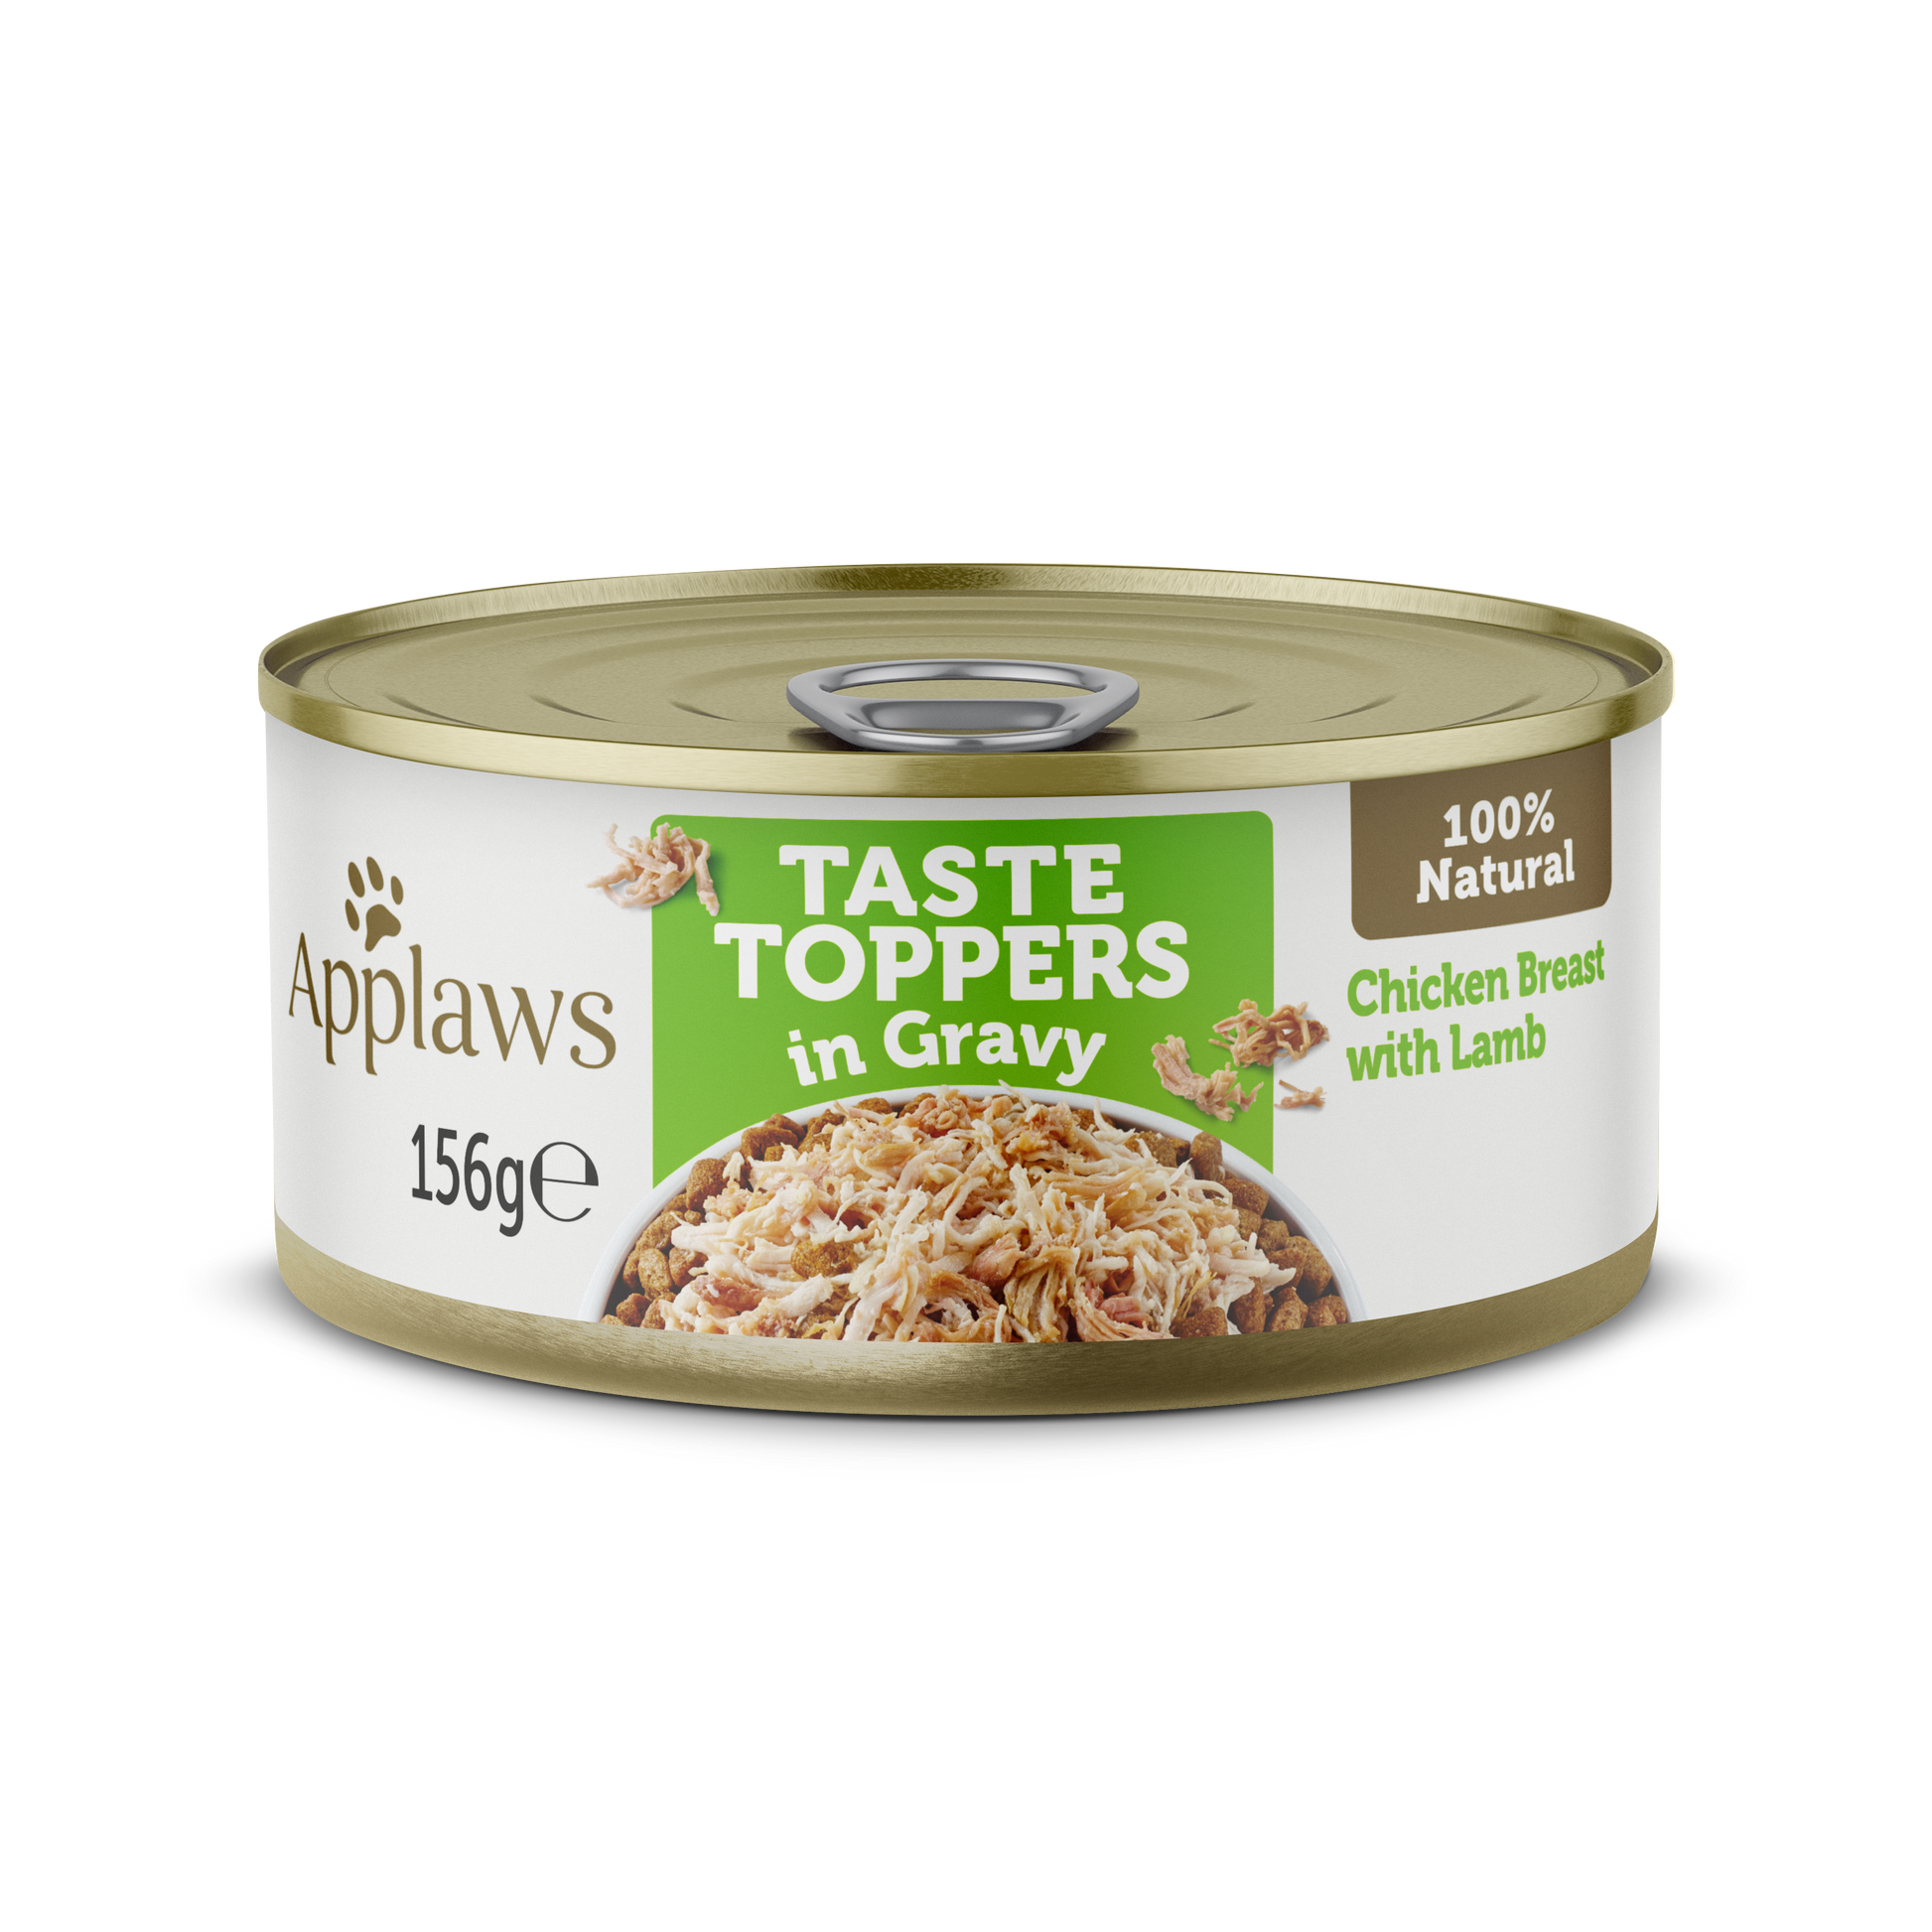 Applaws Taste Topper In Gravy Chicken with Lamb for Dogs, 156G